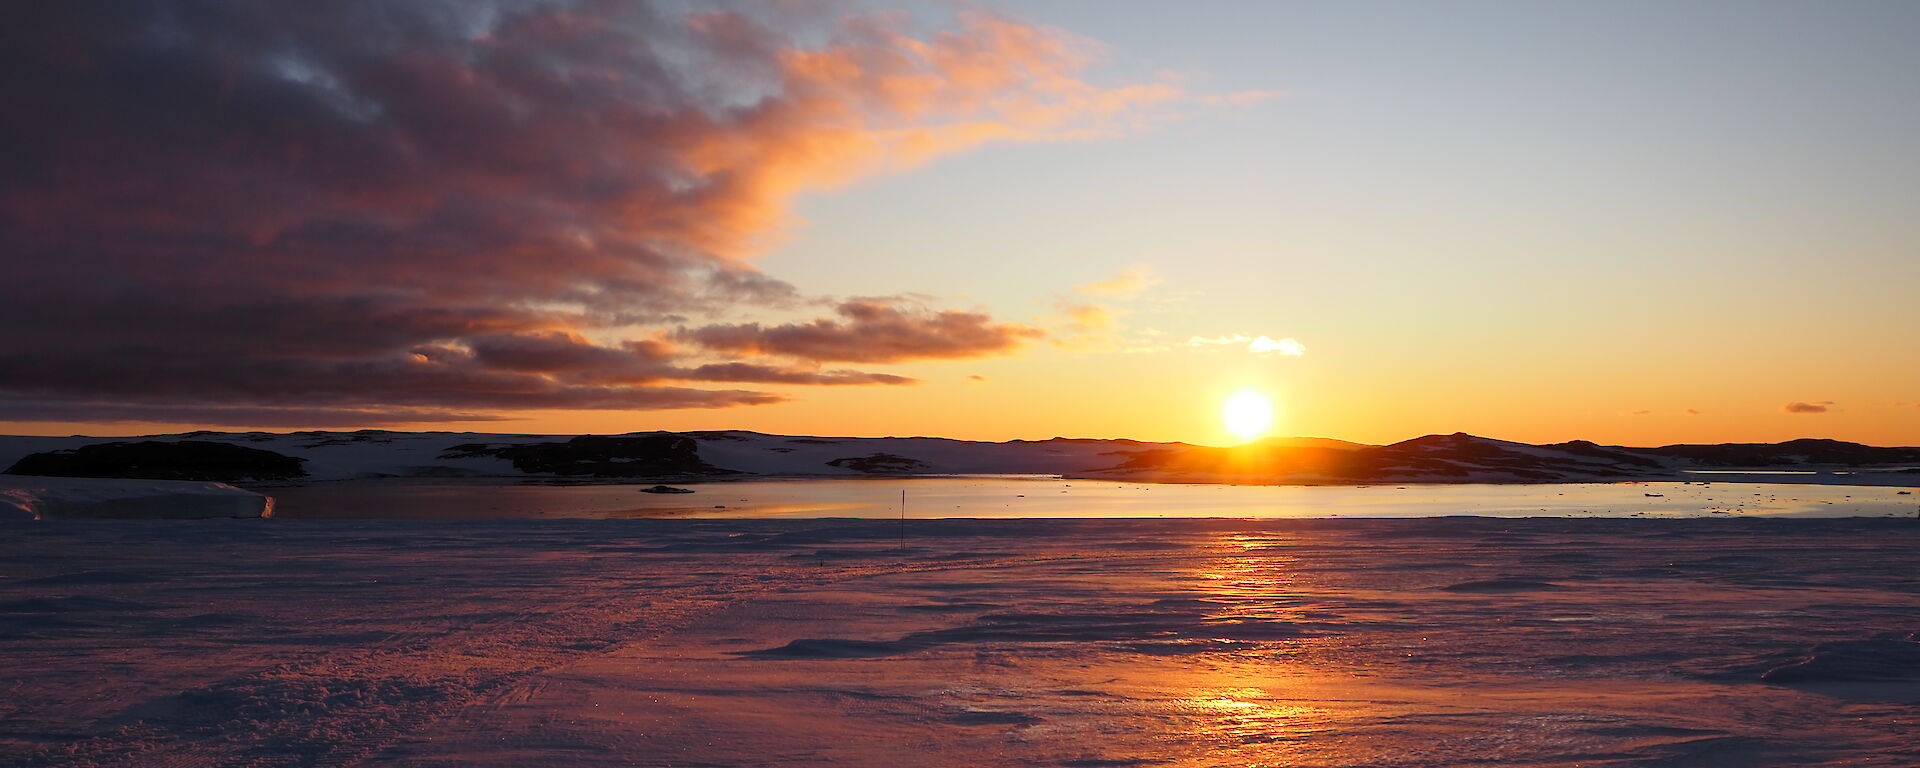 The sun rises over water and ice, with pink clouds in the sky